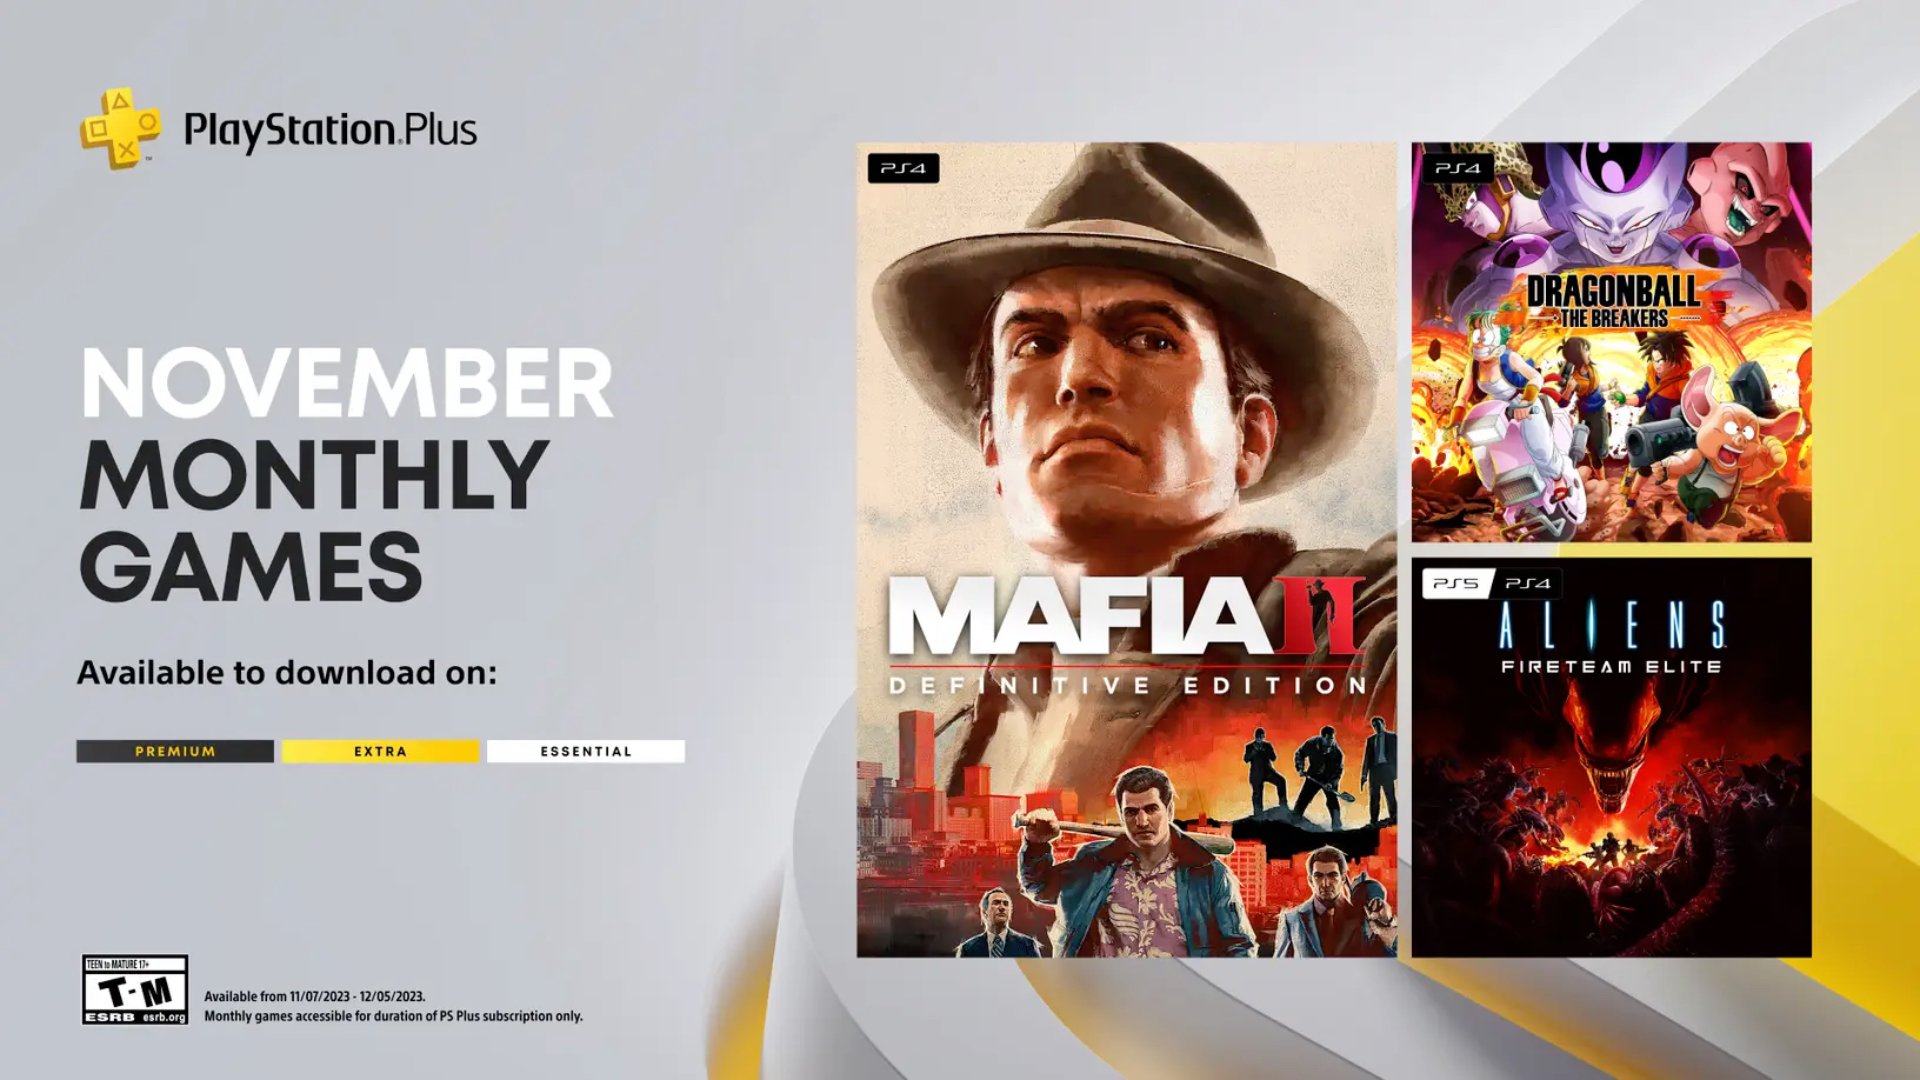 PS Plus Extra and Premium November 2023 games line-up - Crisis